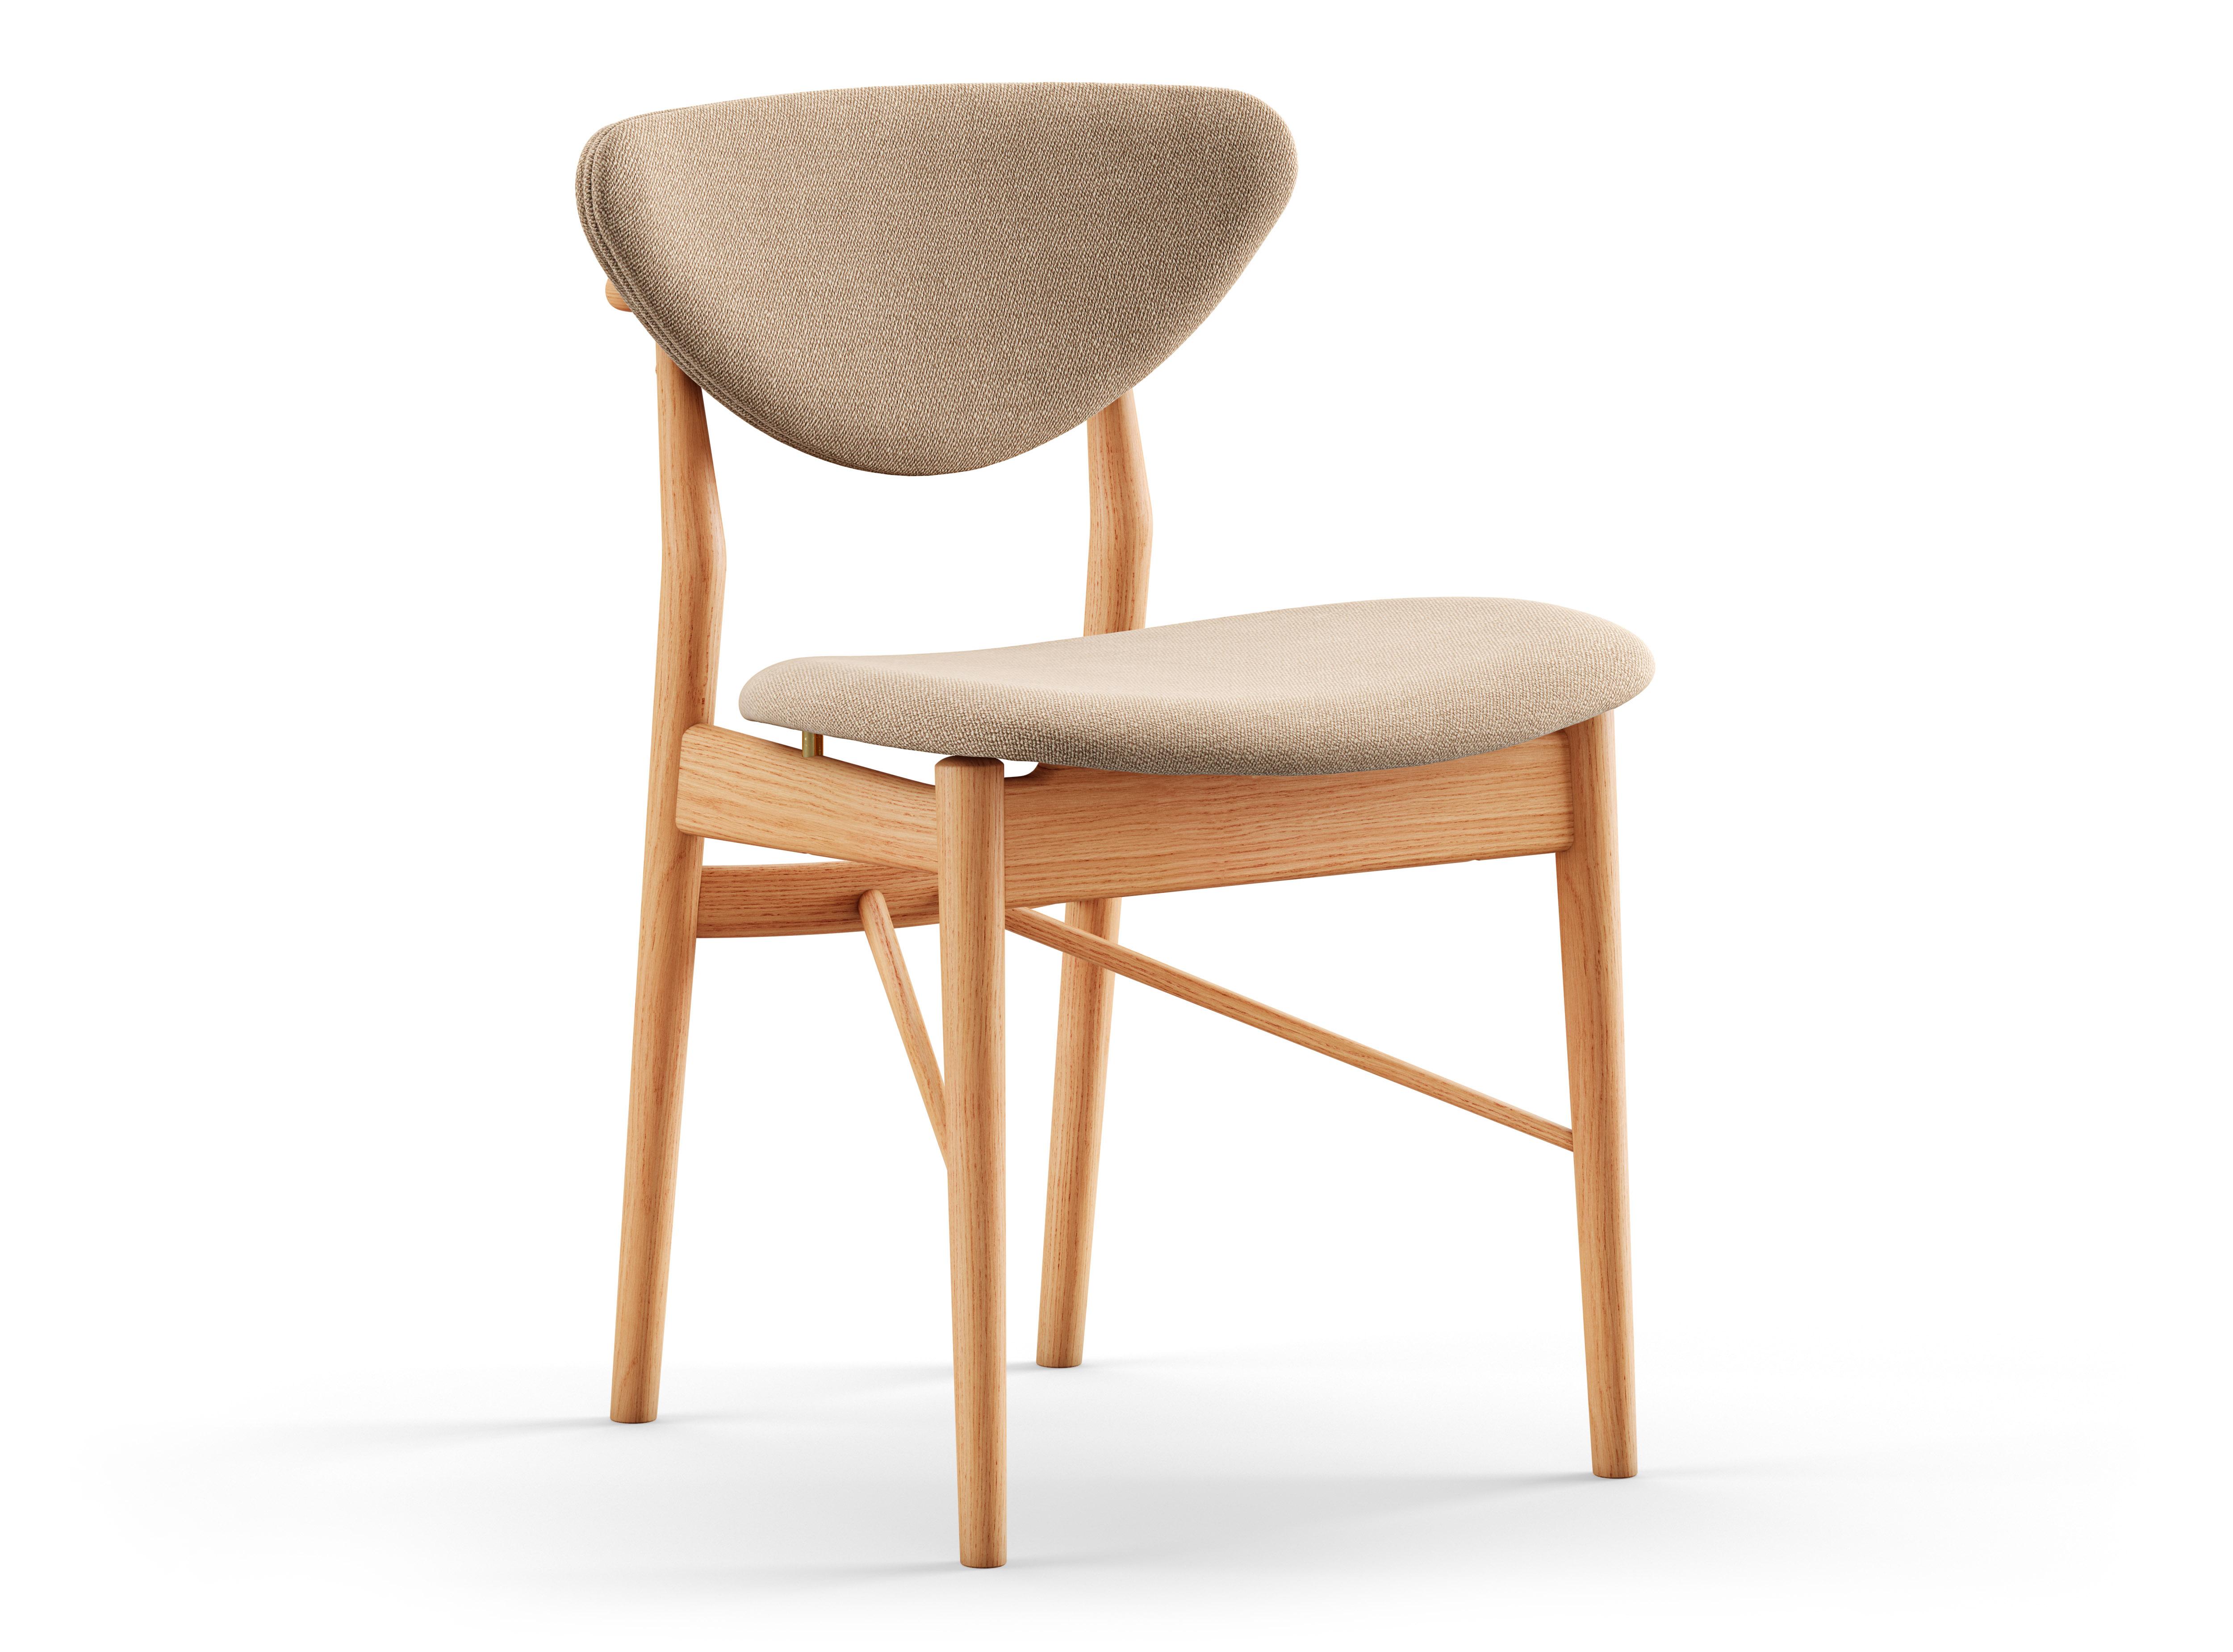 108 chairs designed by Finn Juhl in 1946, relaunched in 208.
Manufactured by House of Finn Juhl in Denmark.

To this day, Finn Juhl's designs are unconventional and defy expectations with subtle details. Finn Juhl himself once said that the